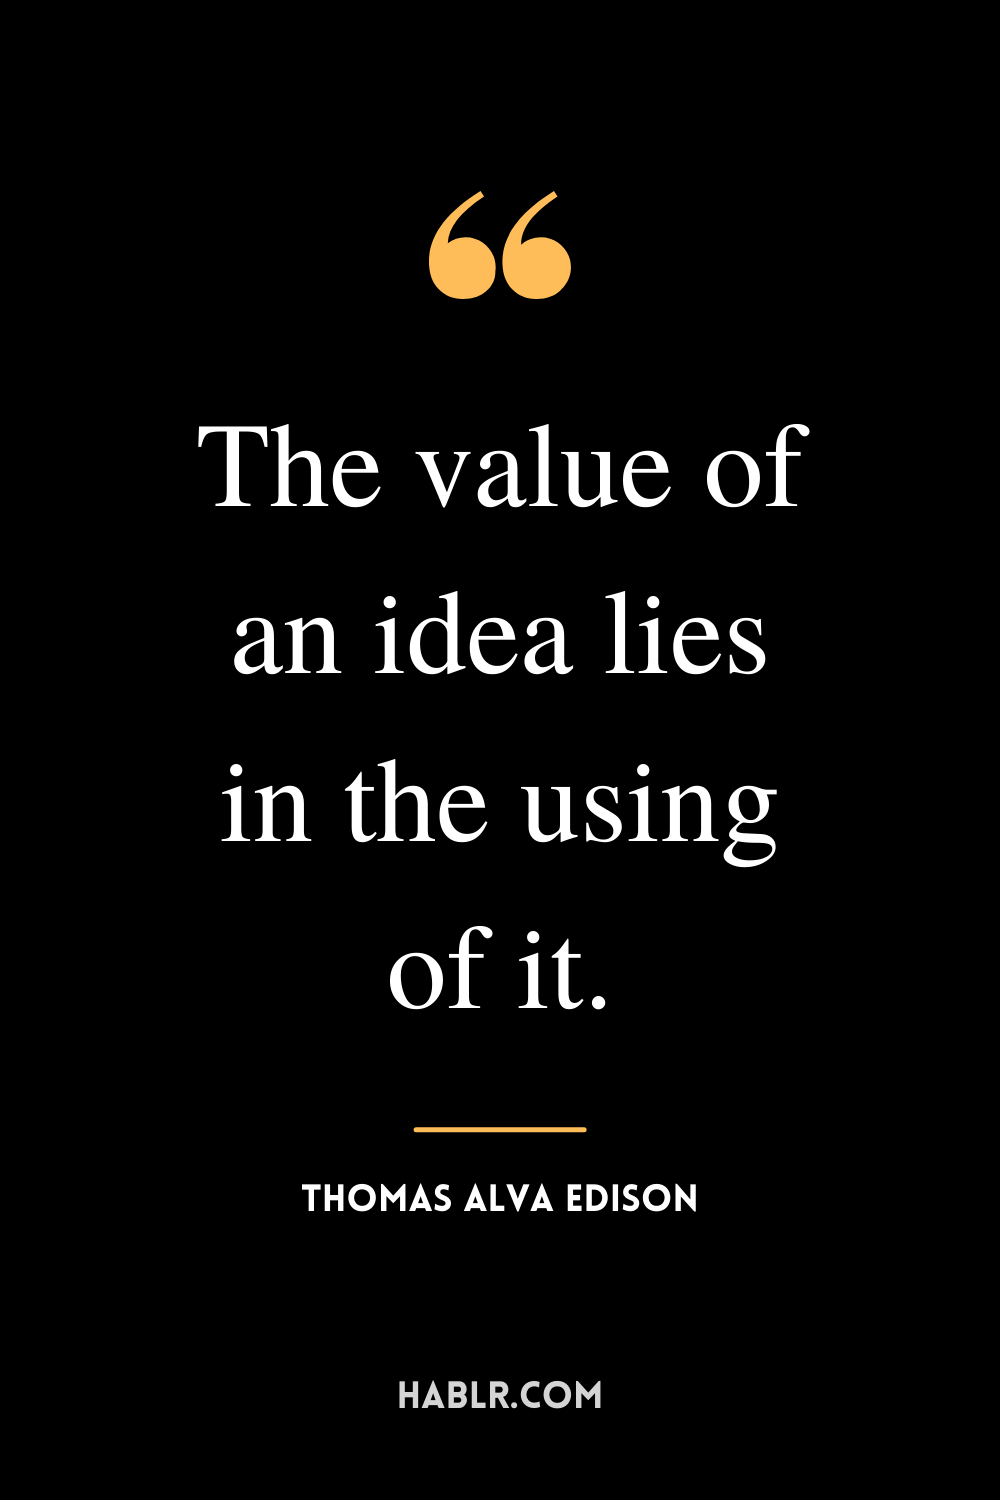 “The value of an idea lies in the using of it.” -Thomas Alva Edison